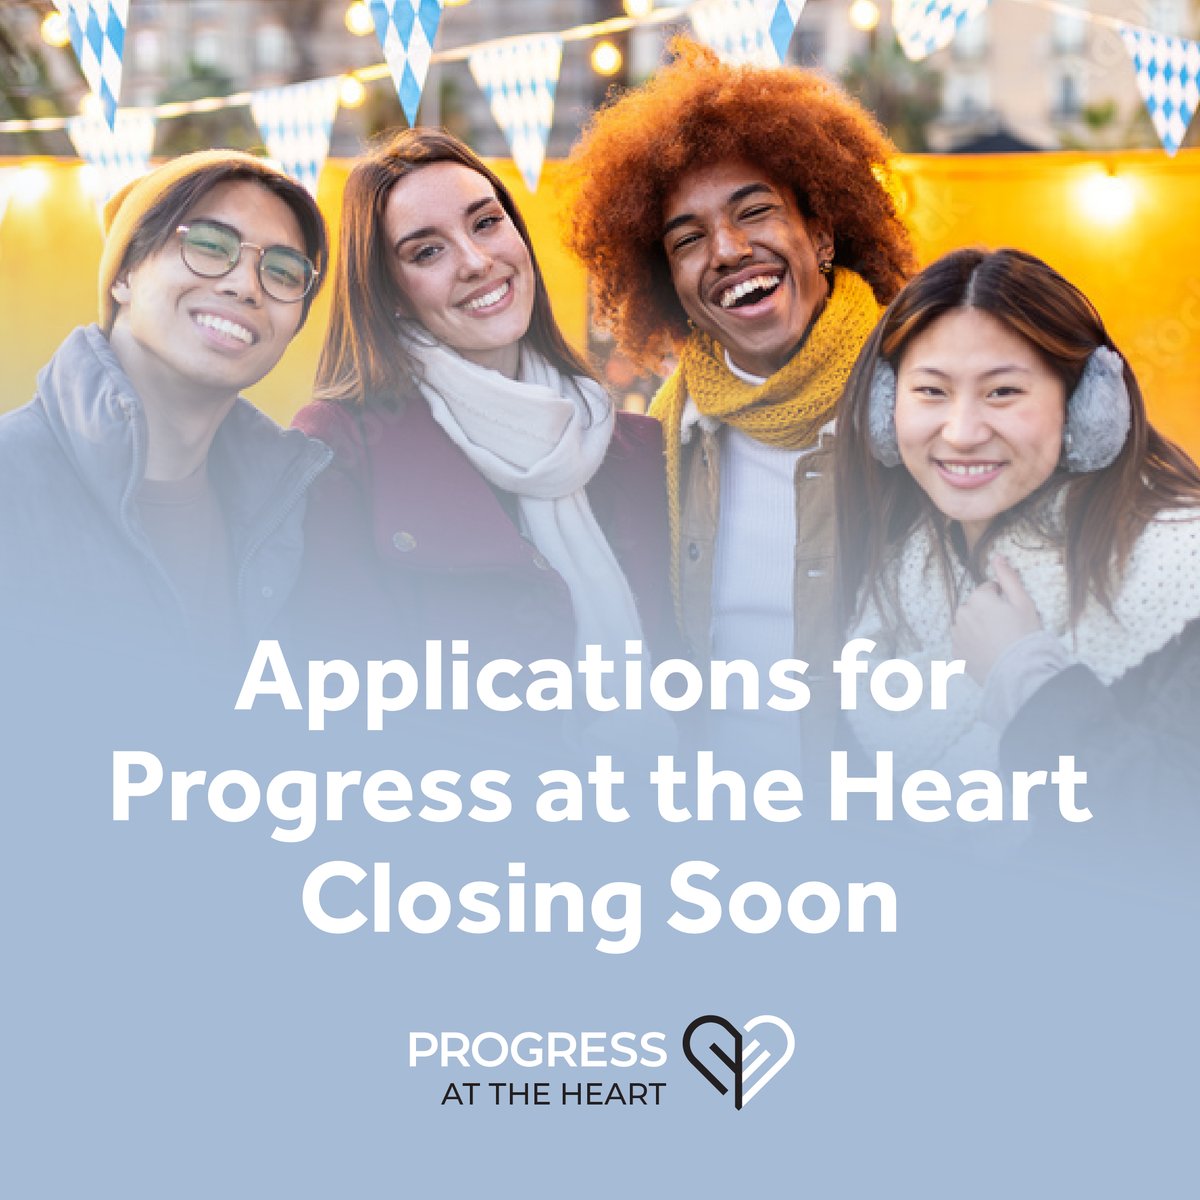 Applications for Progress at the Heart close on May 24! Apply for funding that supports initiatives addressing disparities in treatment access and care in the rare neurological disease community. harmonybiosciences.com/funding-progra…

#ProgressAtTheHeart #RareDiseases #FragileX #SleepDisorders